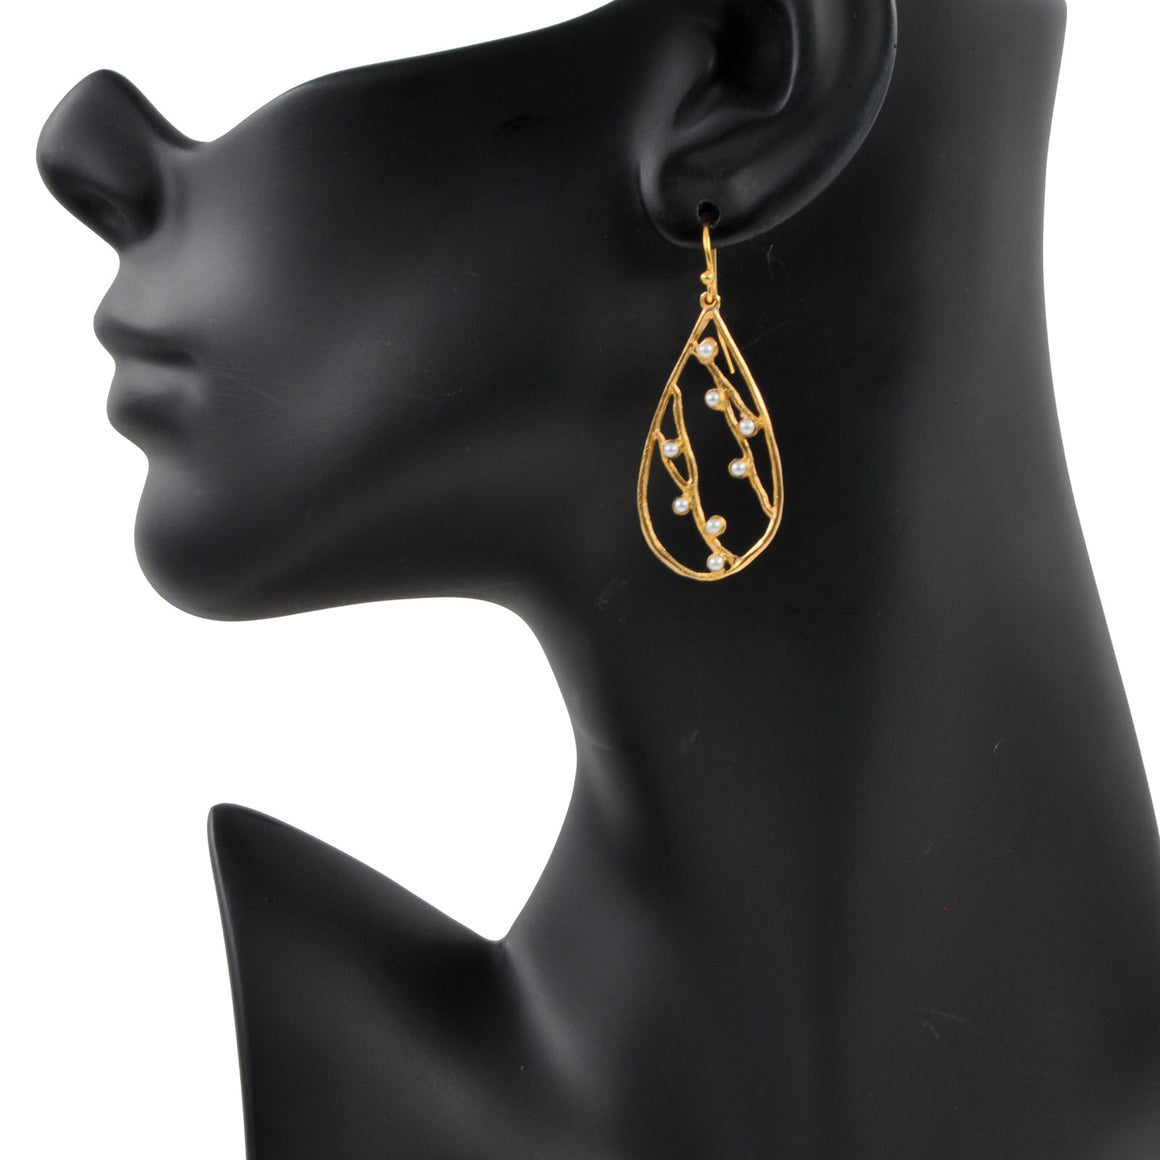 Intricate Branches Pearl Earrings - 24K Gold Plated